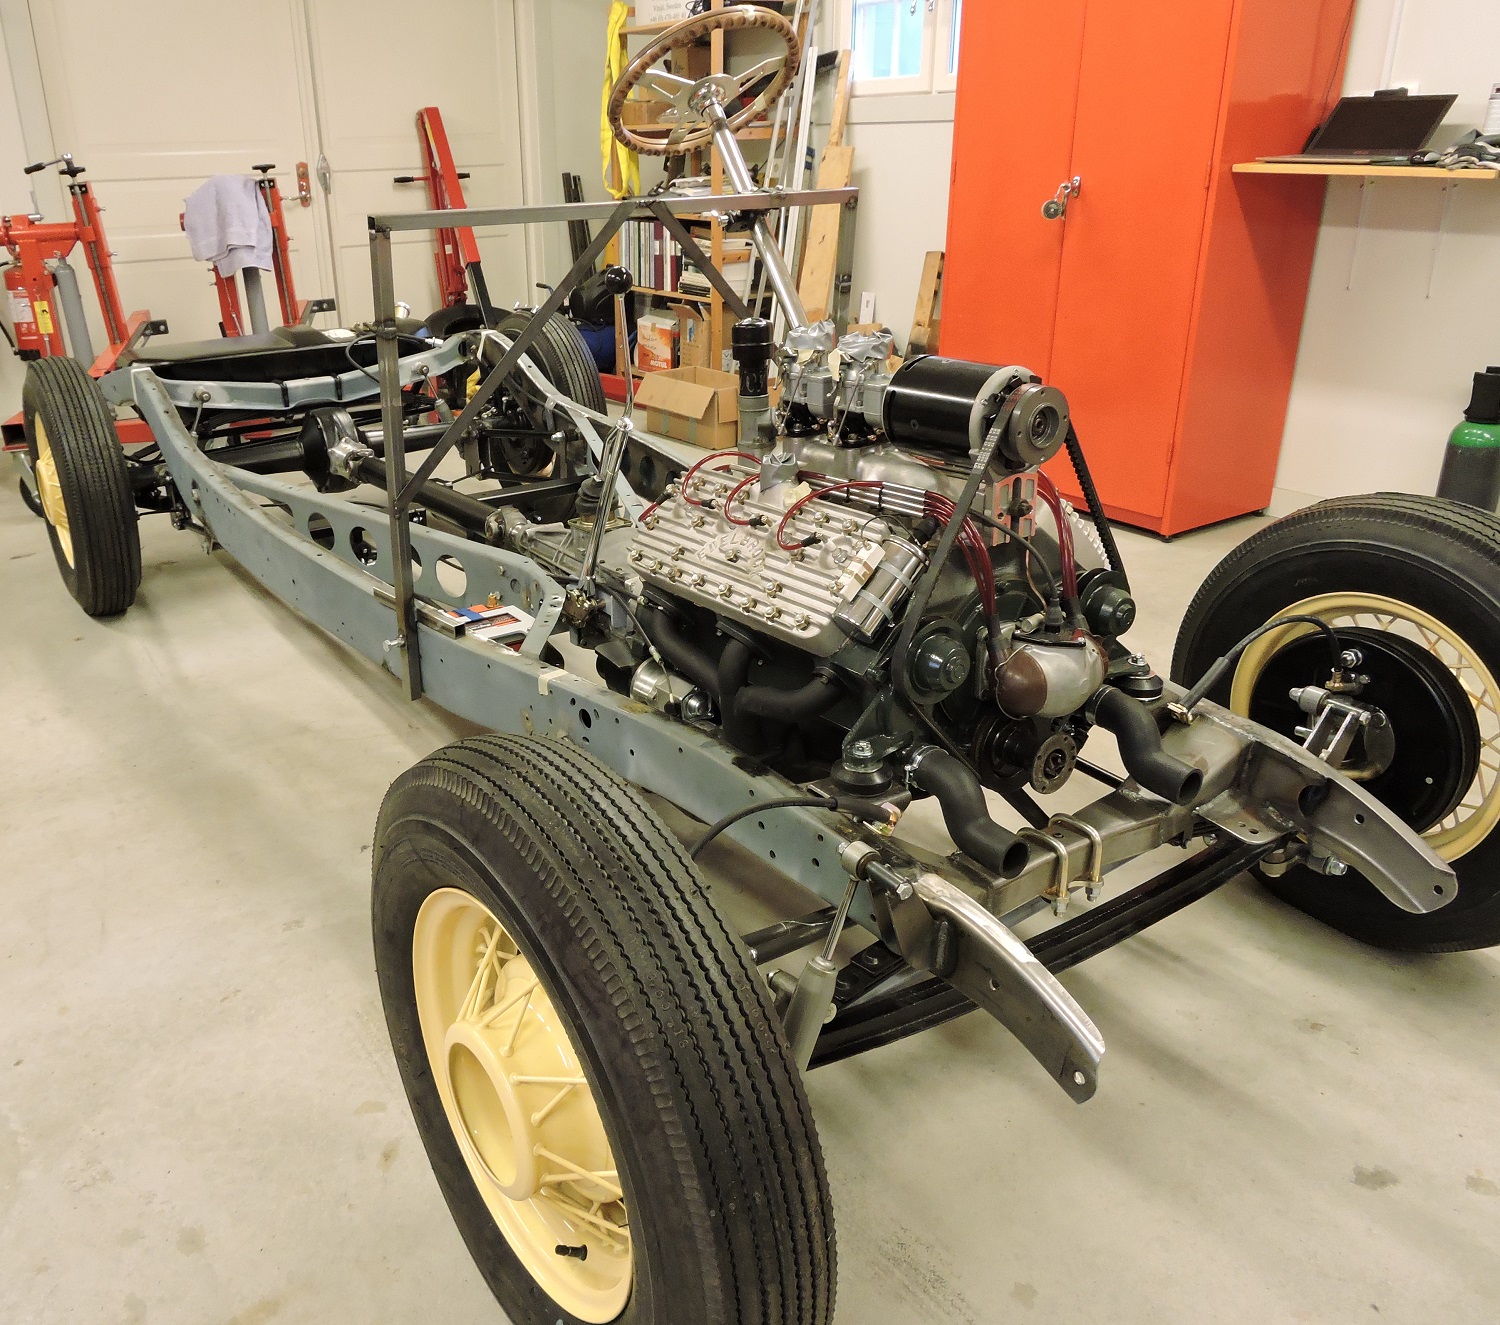 1934 Ford Tudor Chassis Assembled 2017-02-20